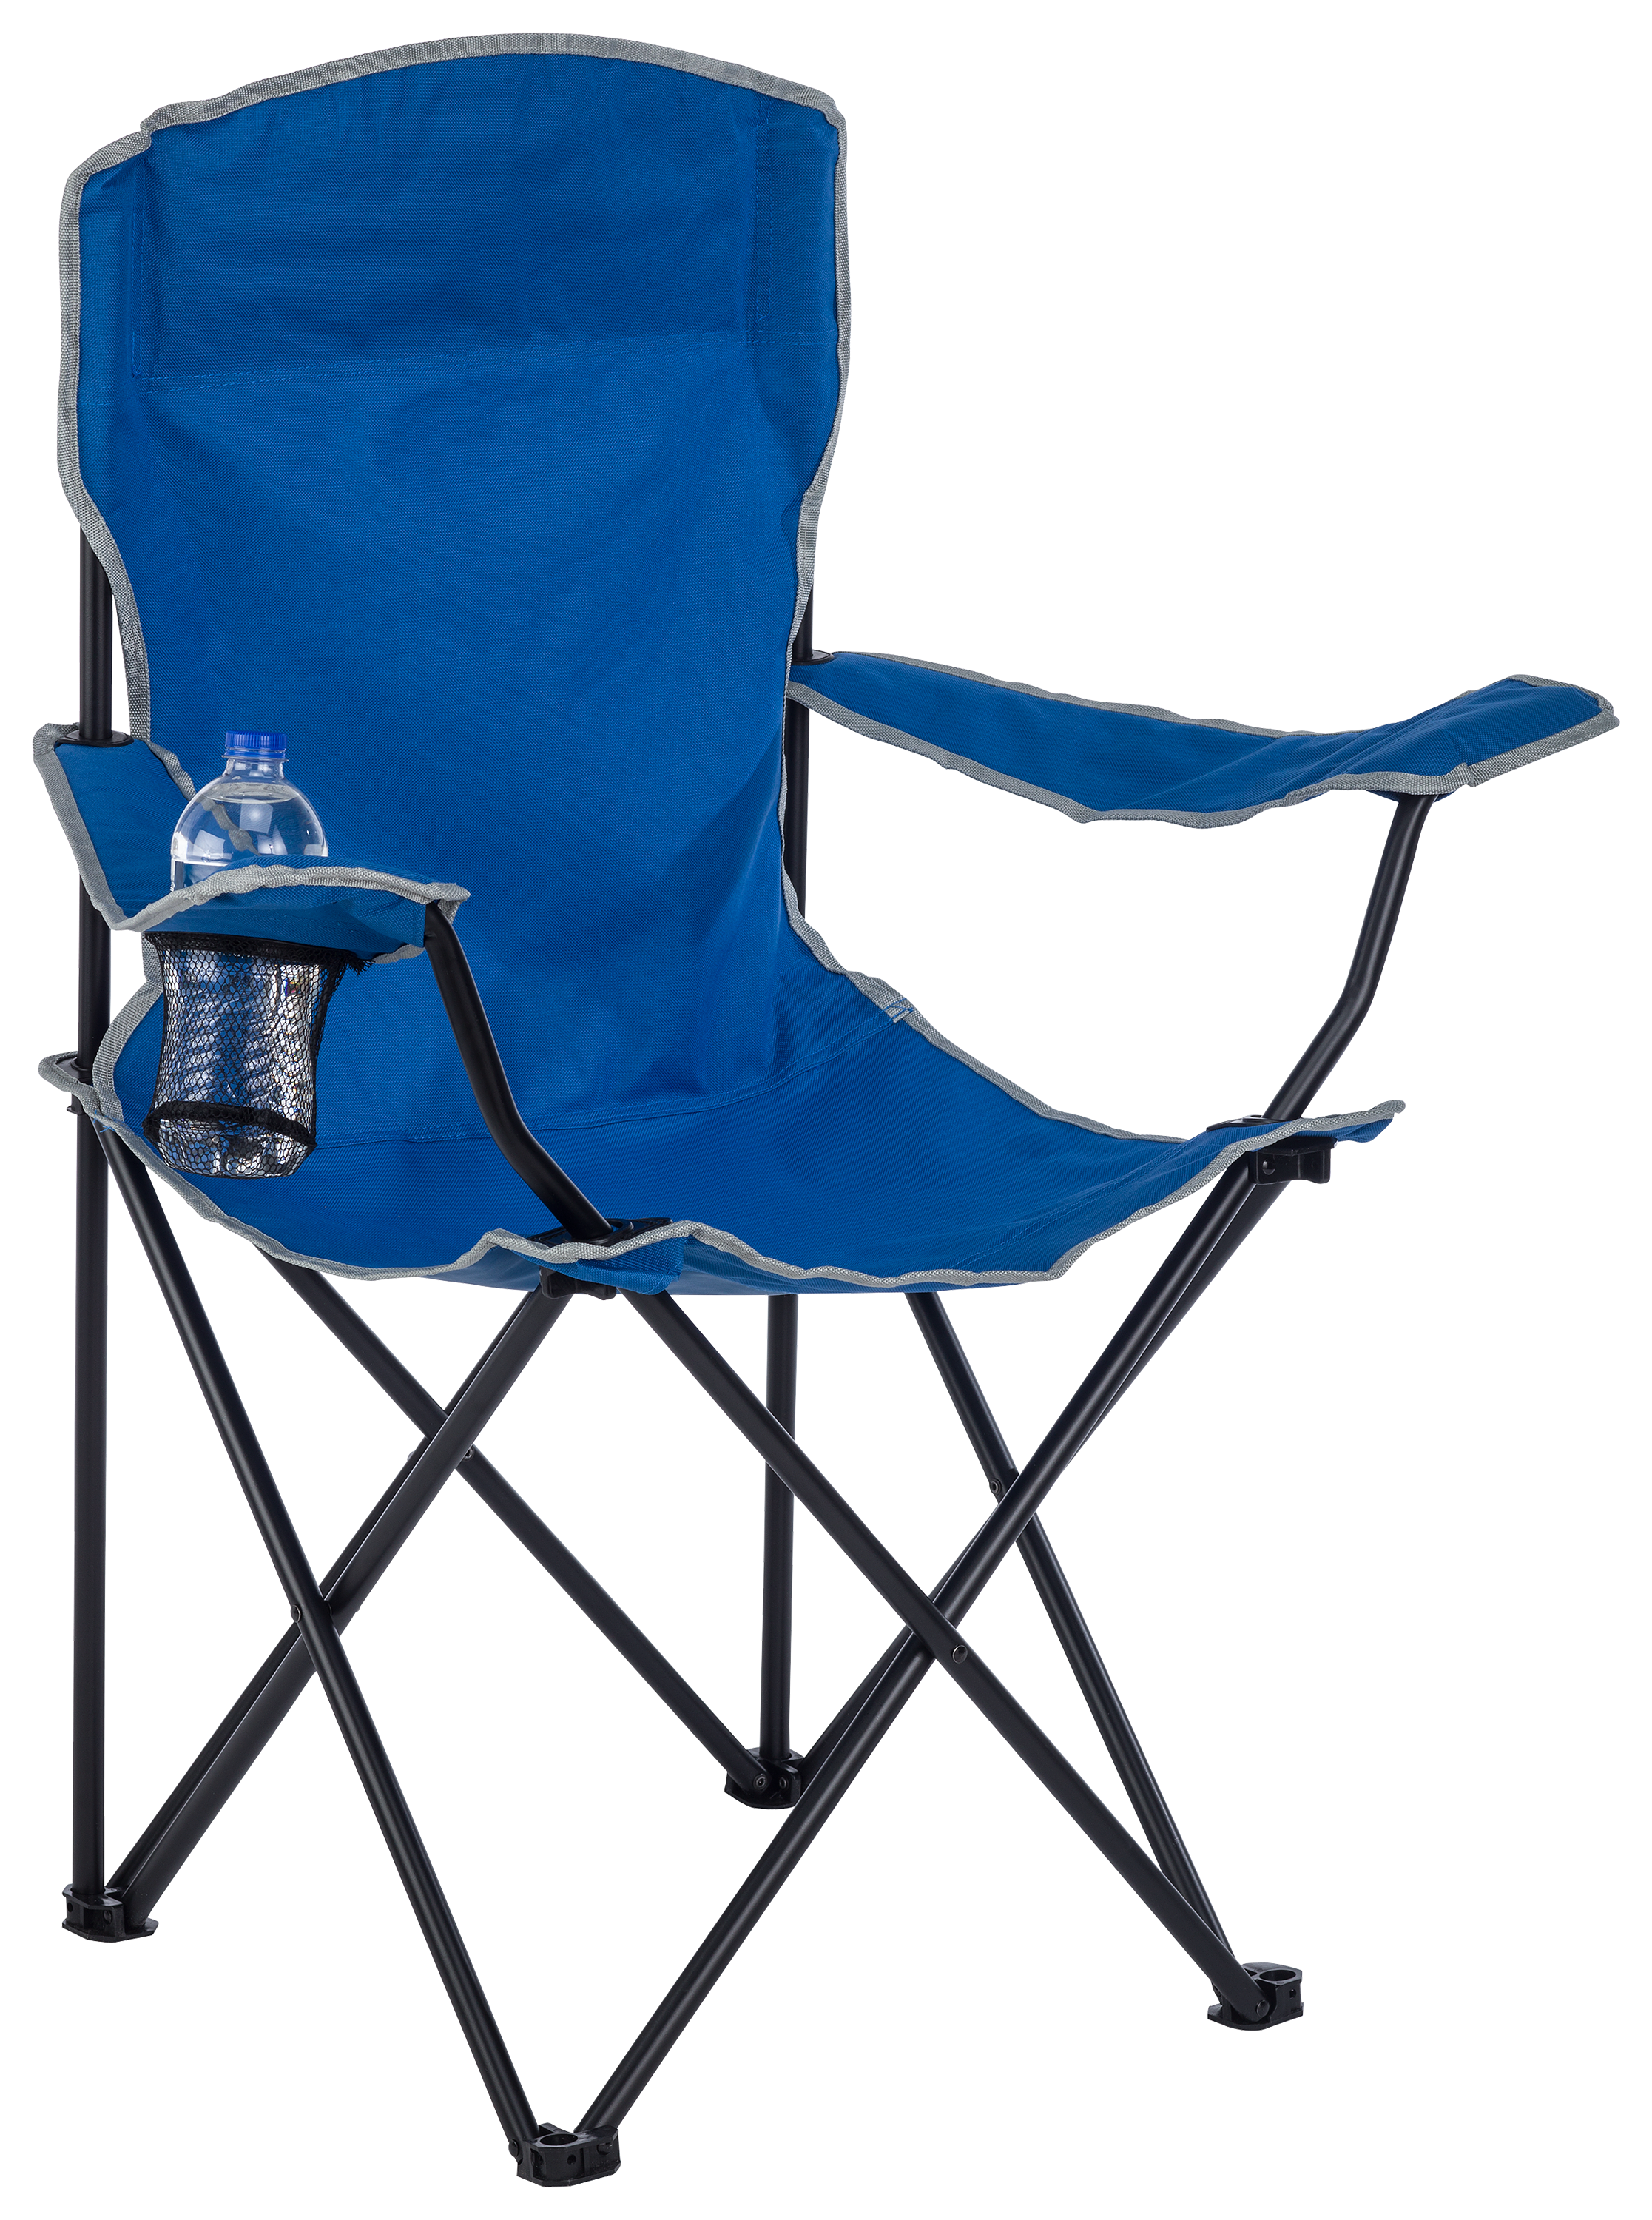 Foldable Camping & Fishing Chair with Cup Holder Stand and Arm